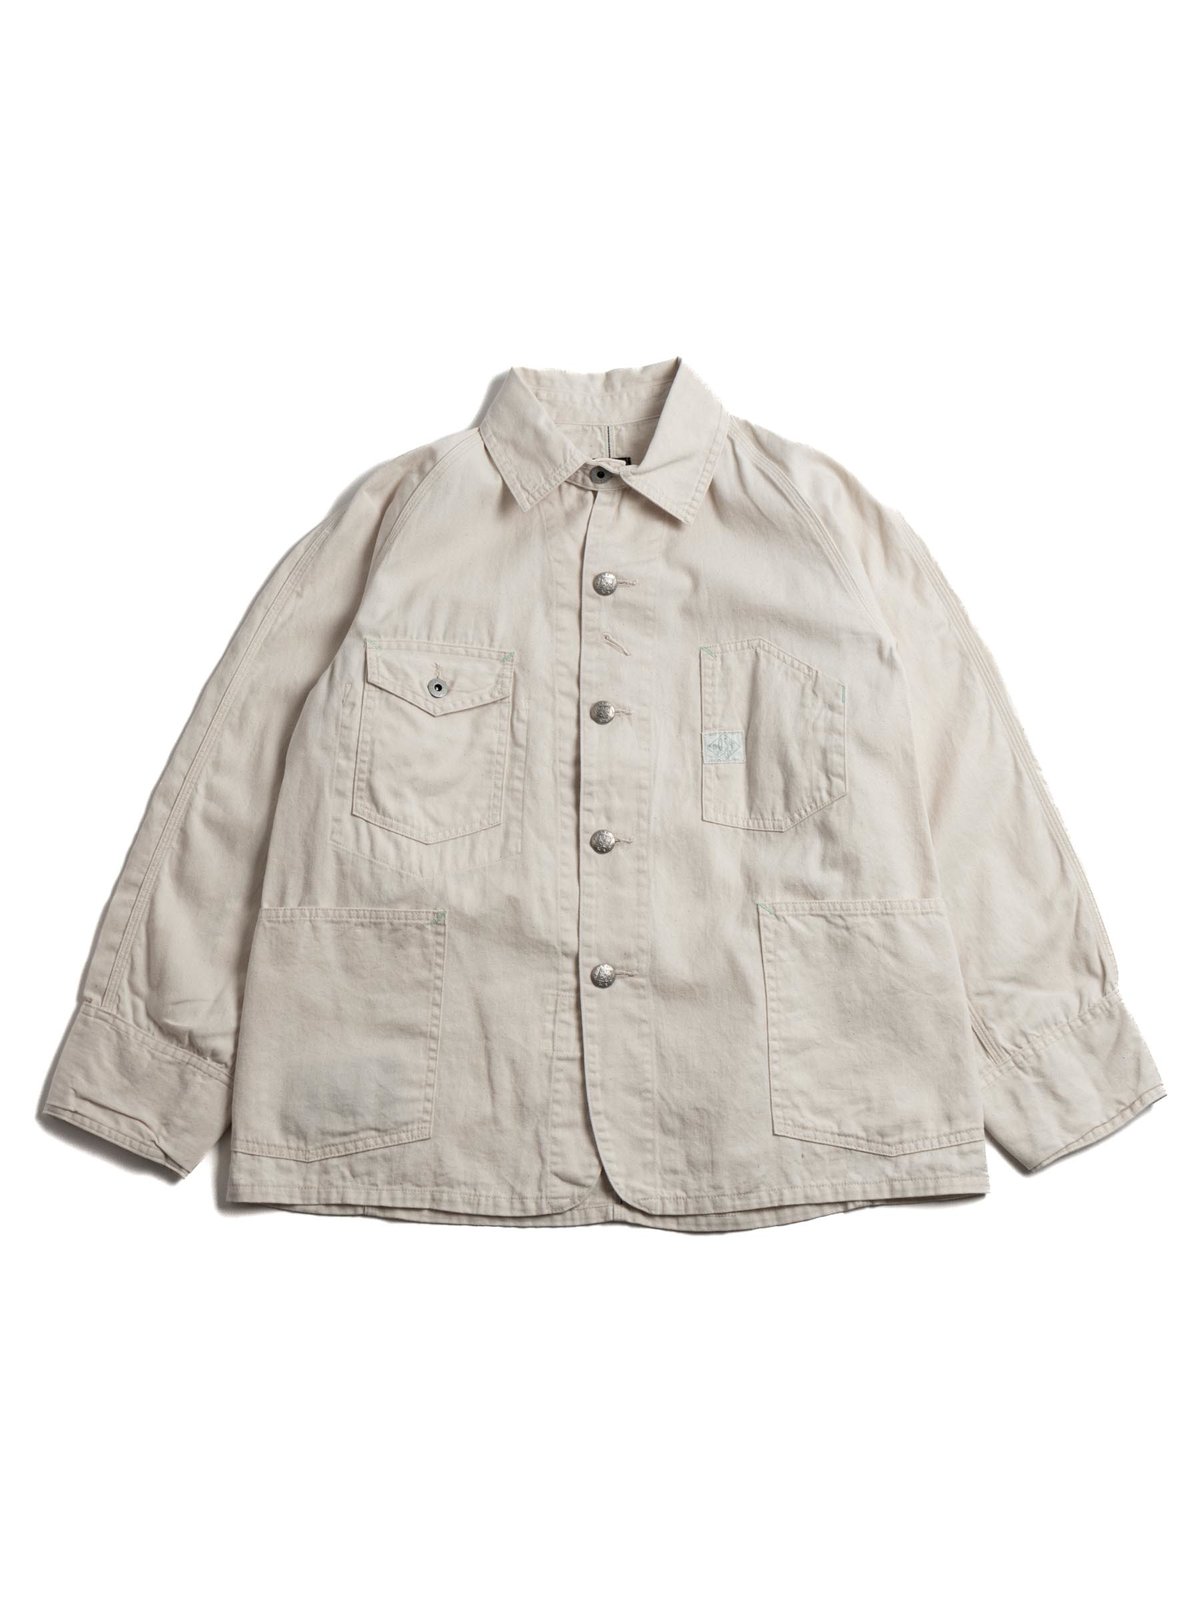 ENGINEER’S JACKET COTTON DRILL NATURAL - Image 1